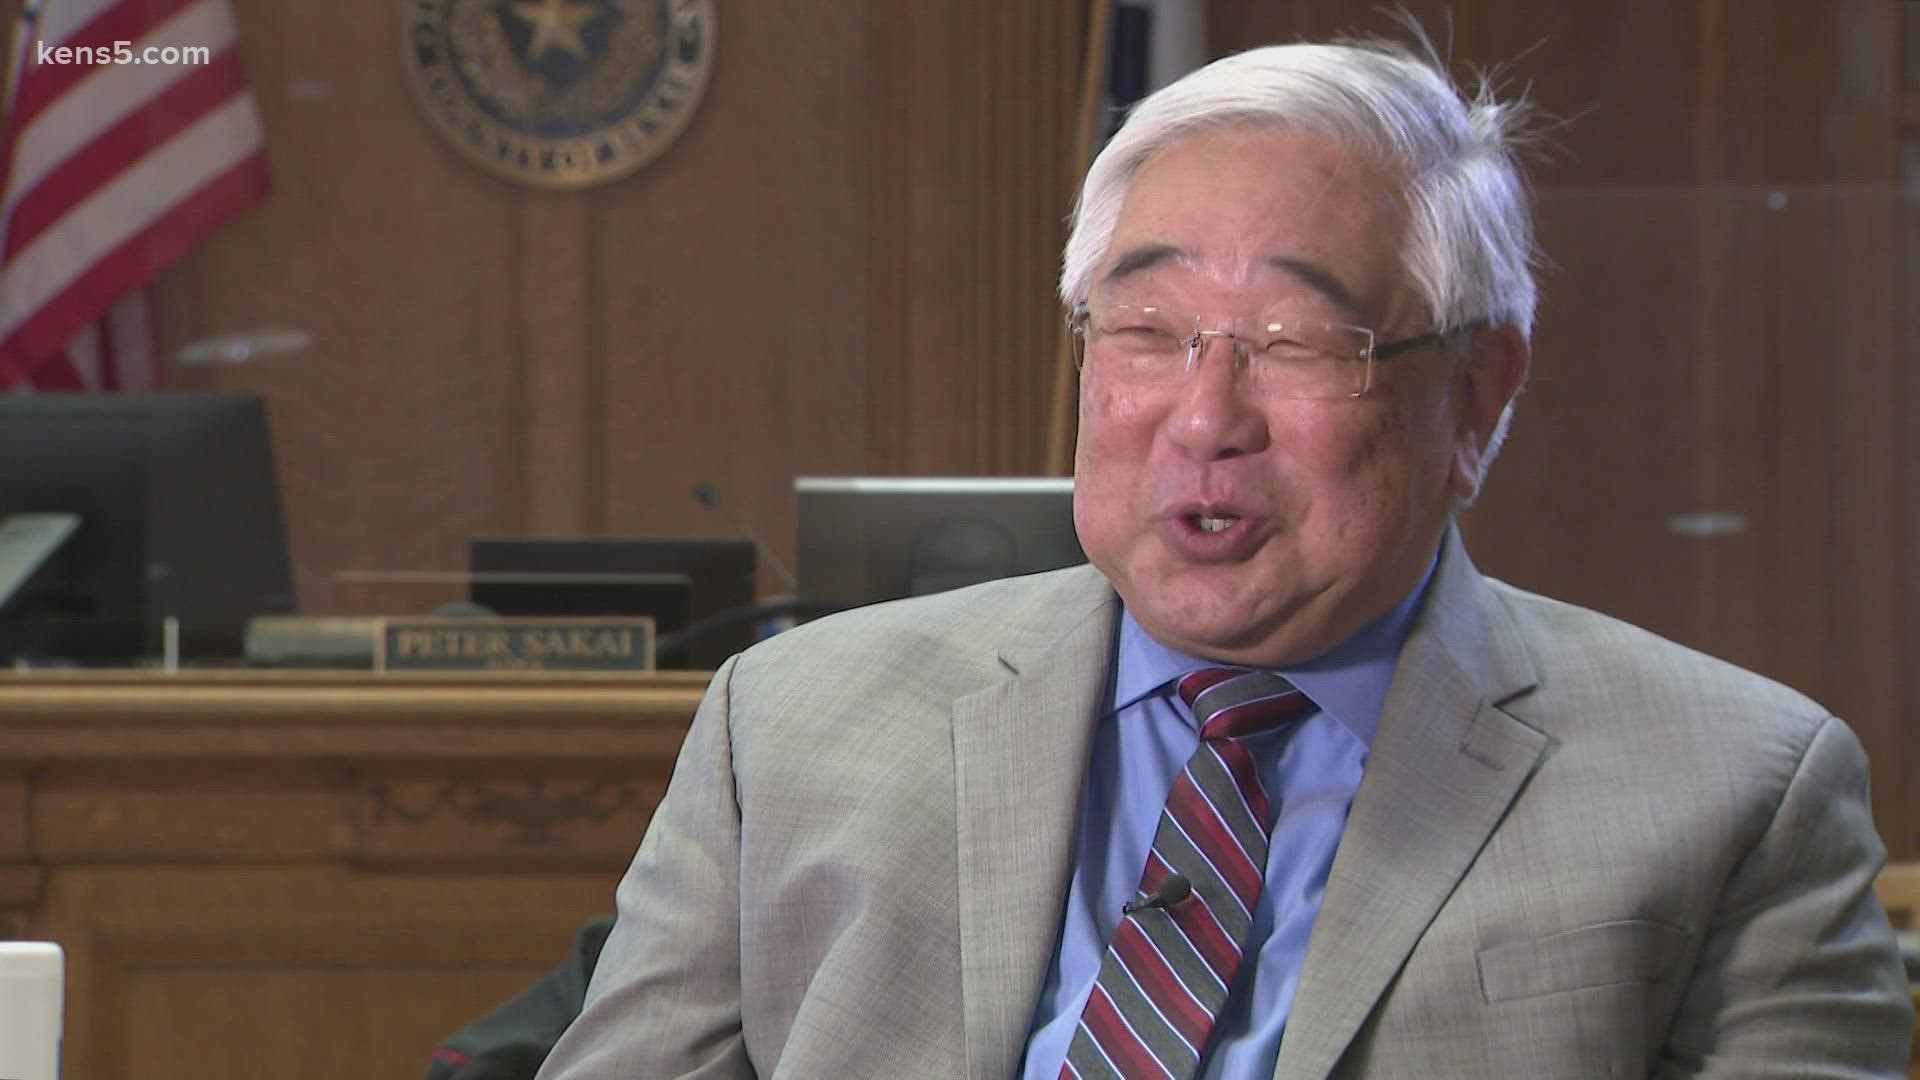 Judge Peter Sakai has served as an advocate for the child welfare and foster care system in the San Antonio area.